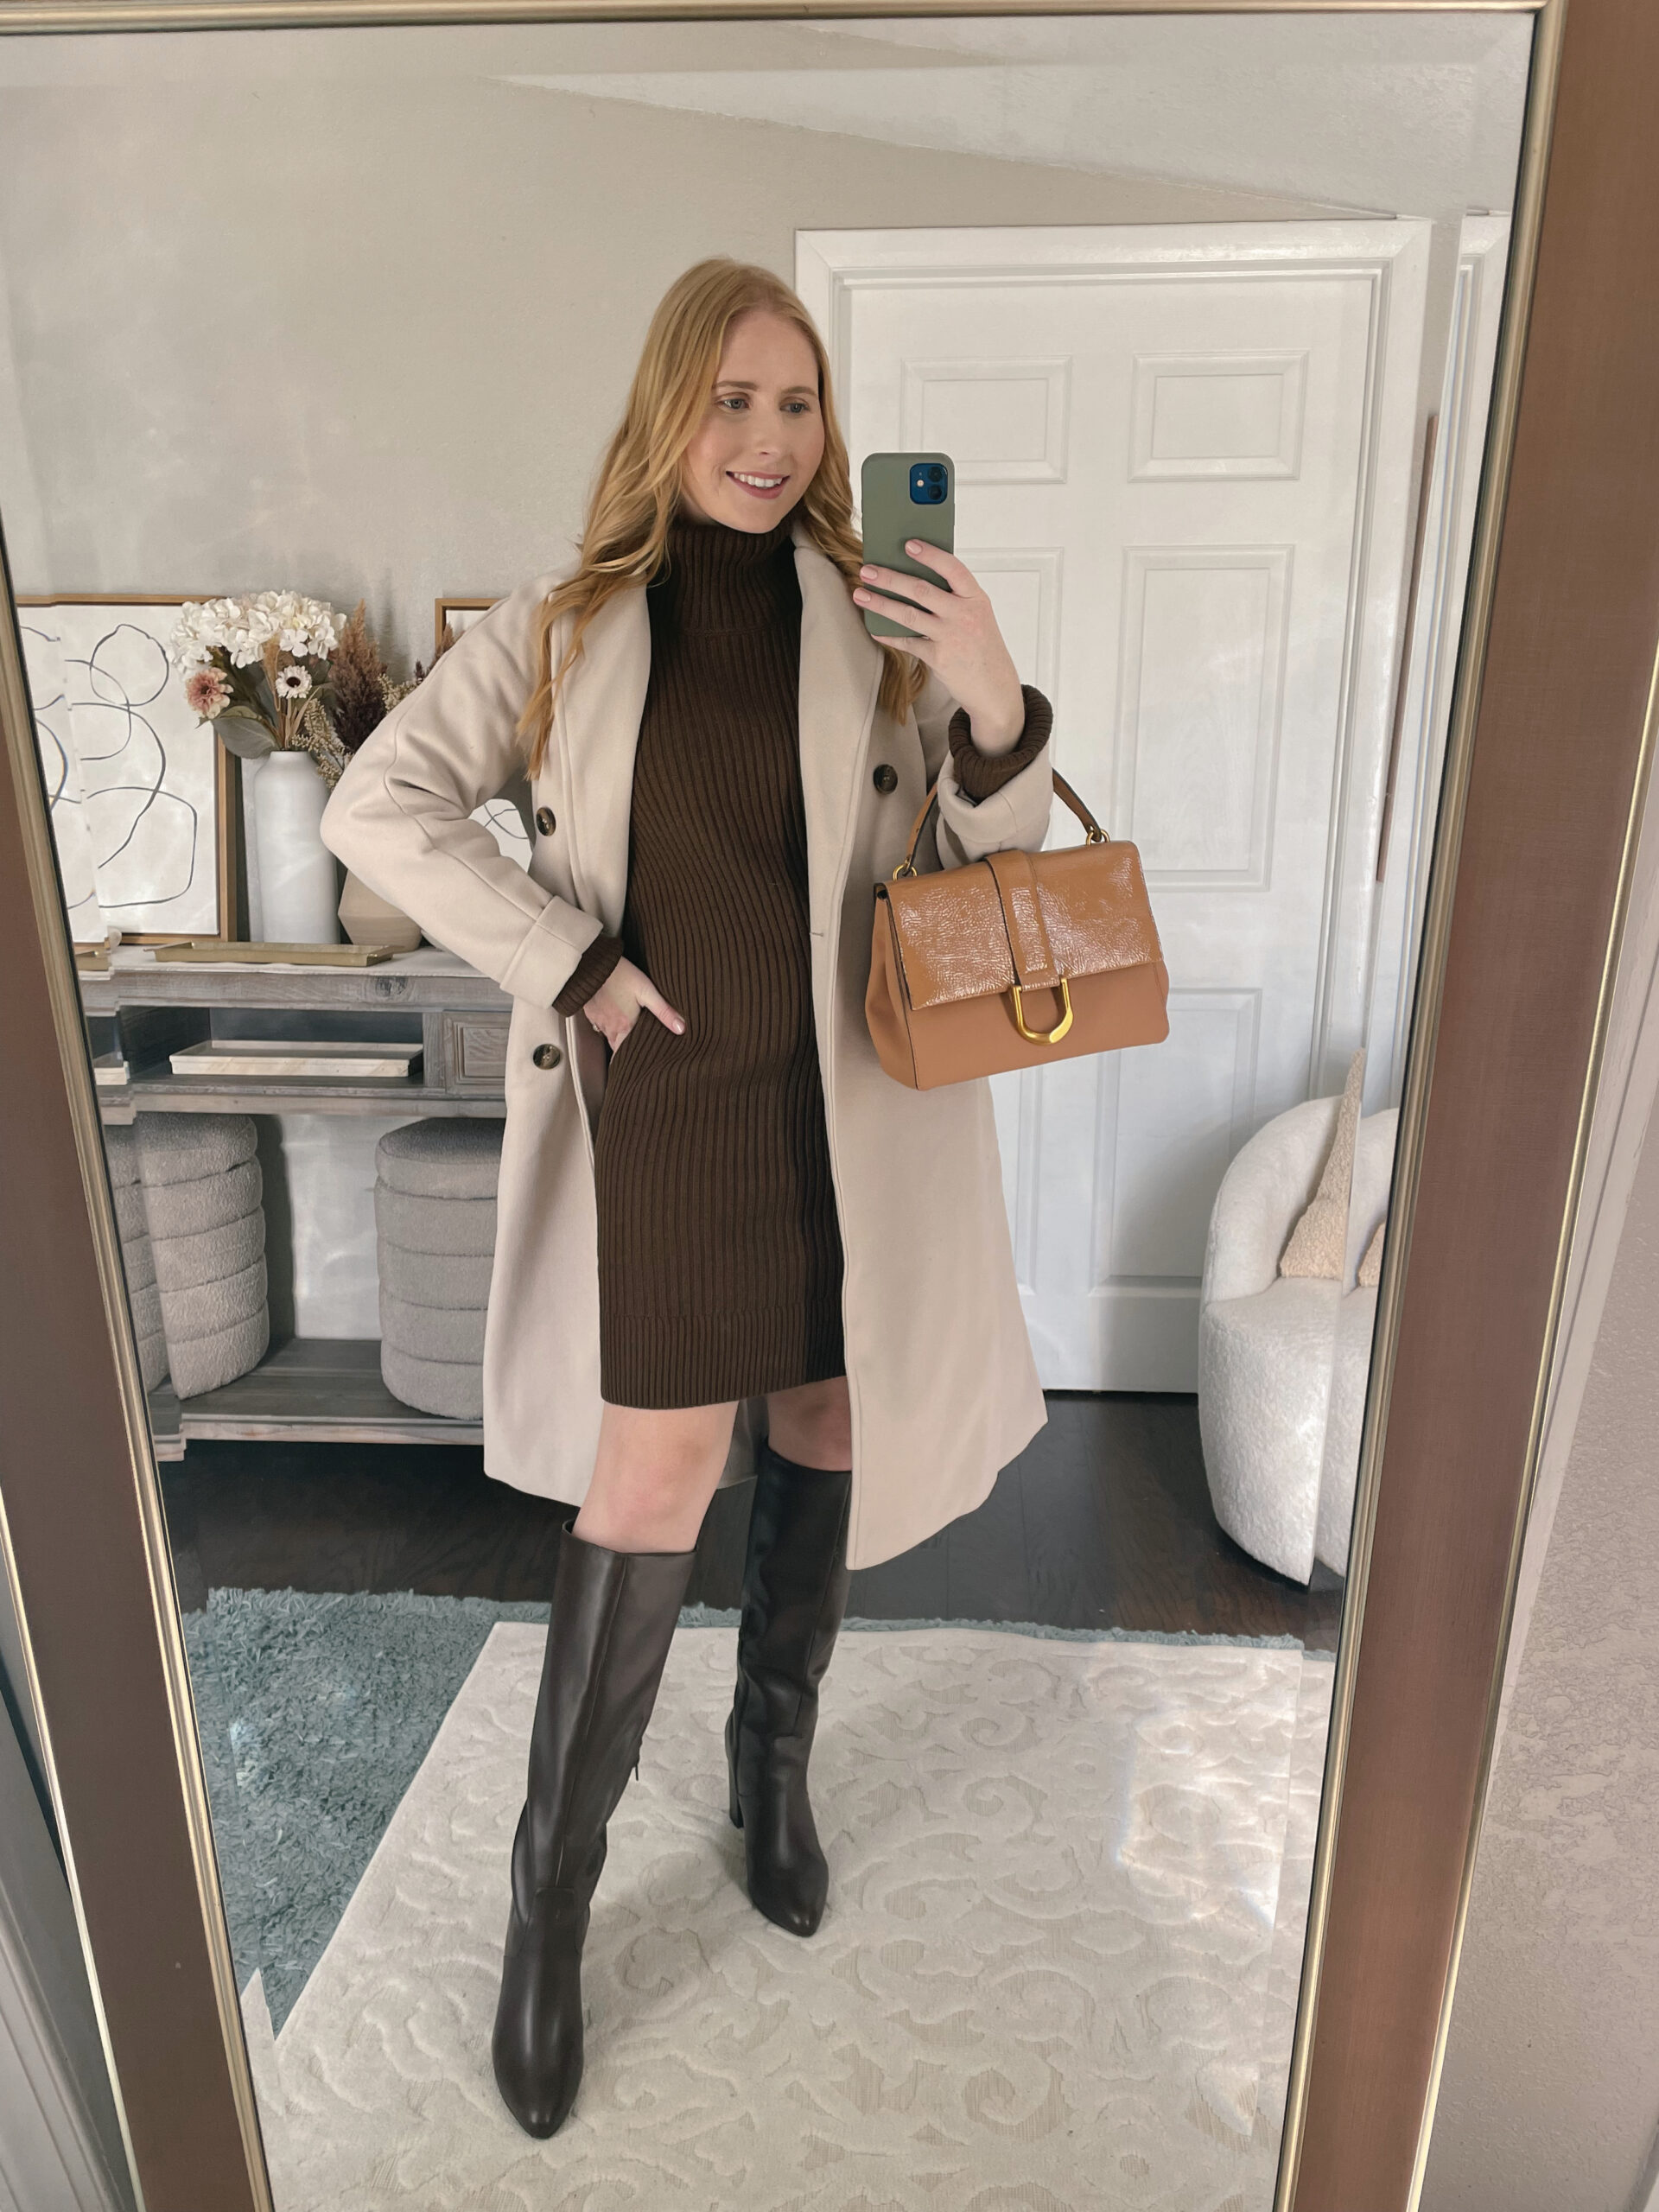 10 Thanksgiving Outfit Ideas - Affordable by Amanda